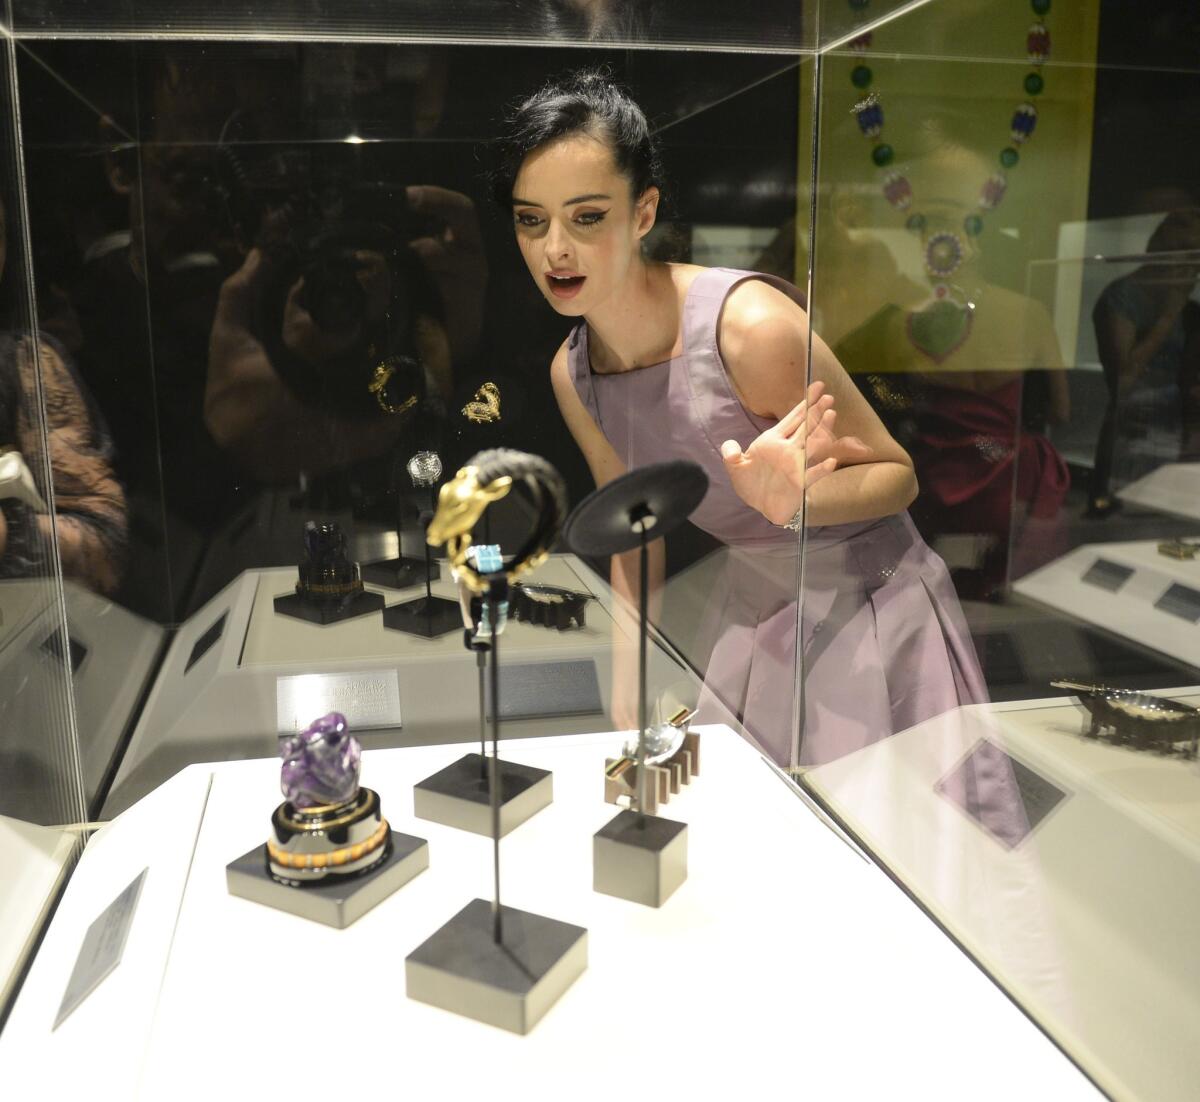 Krysten Ritter views some of the pieces on display at "A Quest for Beauty: The Art Of Van Cleef & Arpels" at the Bowers Museum in Santa Ana